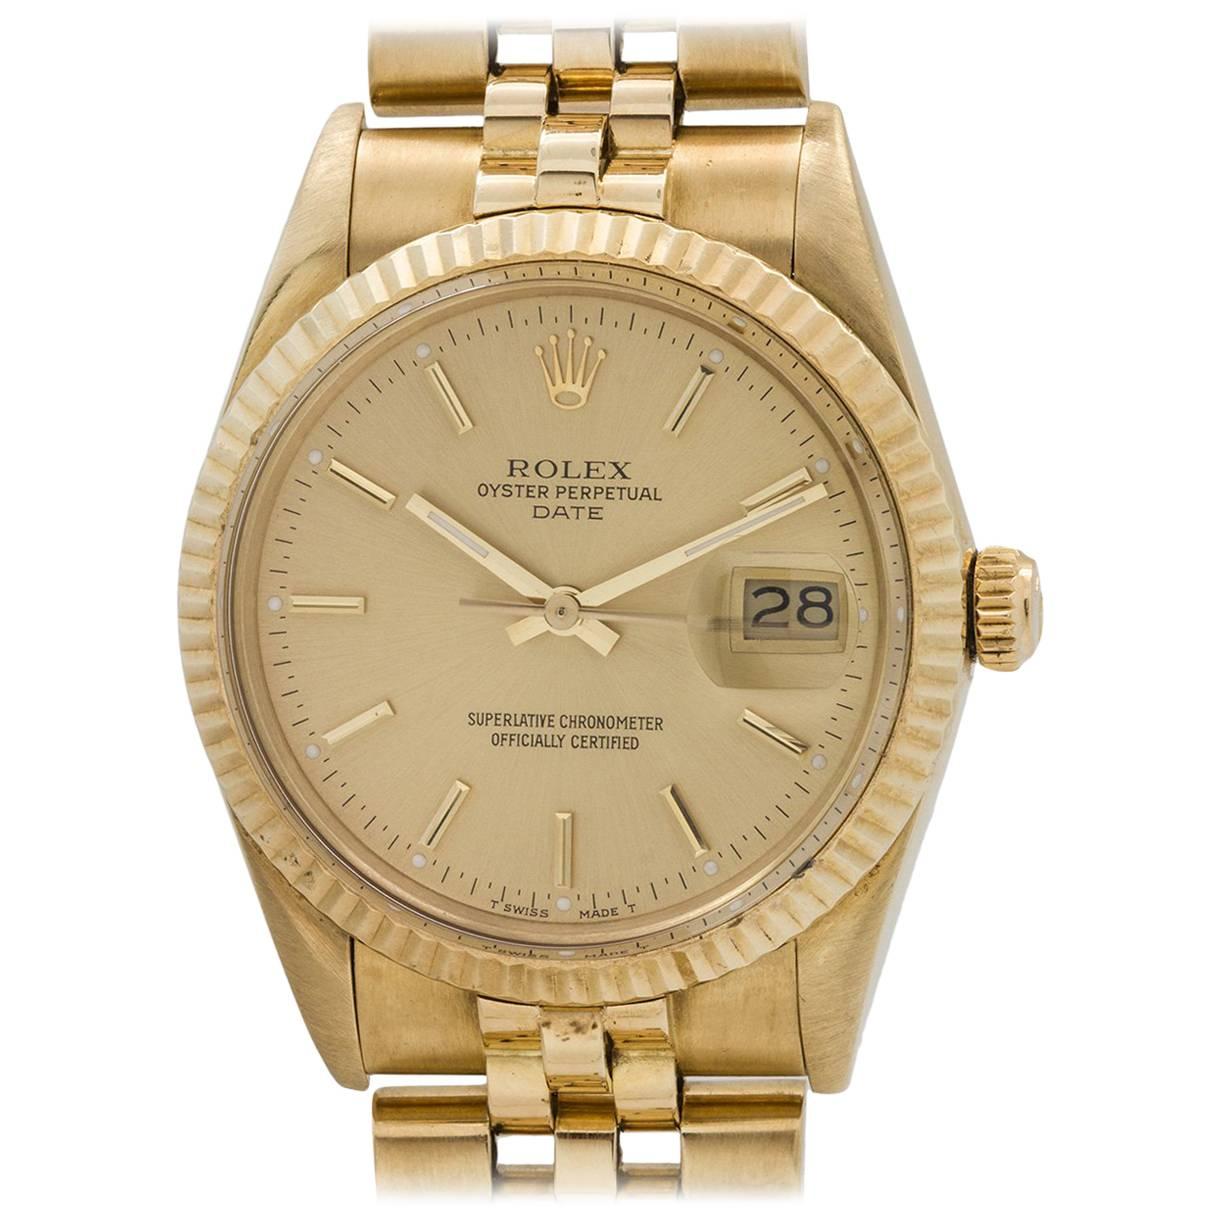 Rolex Yellow Gold Oyster Perpetual Date Wristwatch Ref 15037, circa 1986